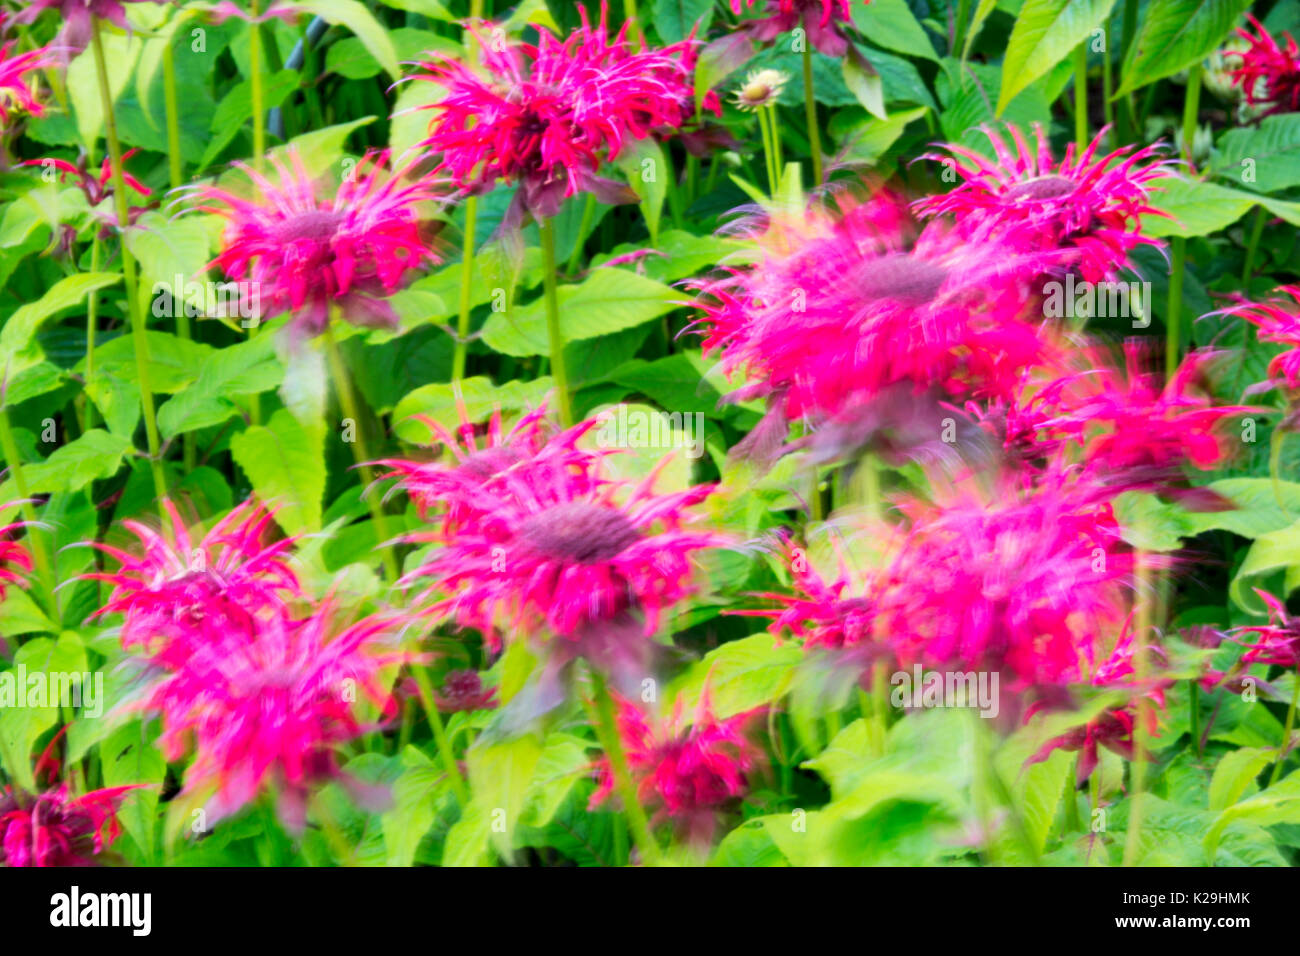 Summer flowers blowing in the wind in a garden, Clitheroe, UK. Stock Photo